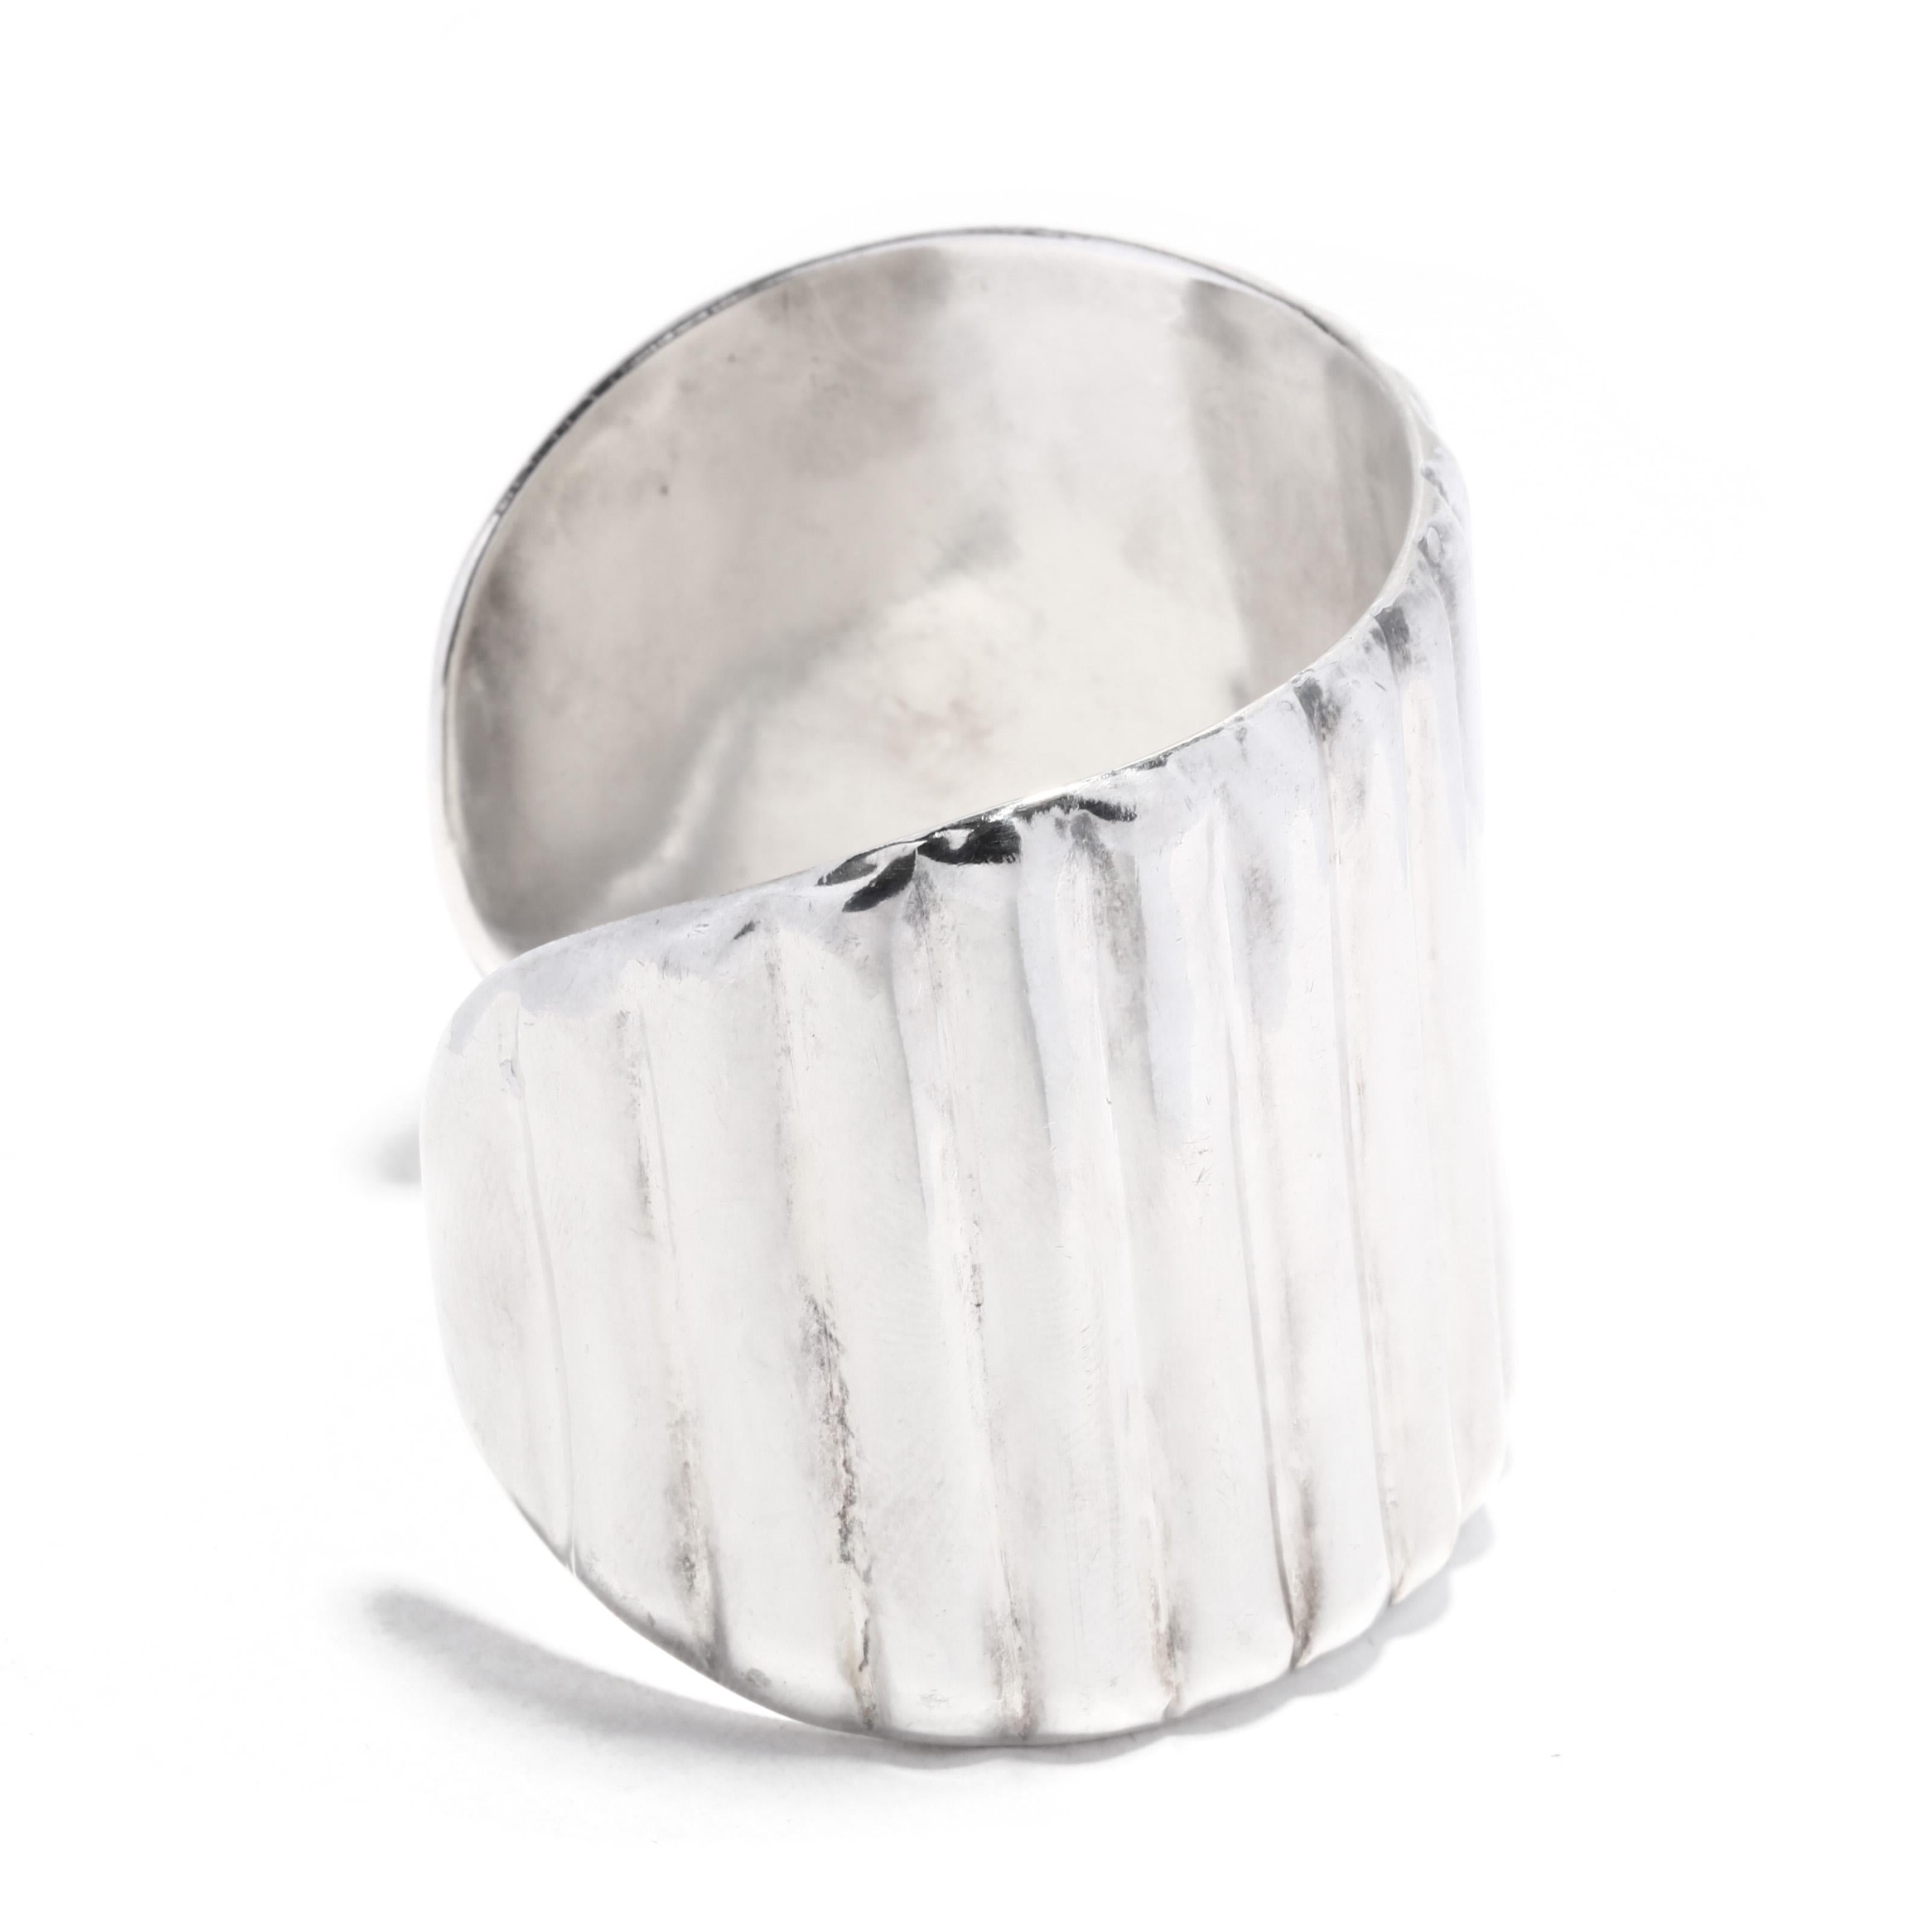 This stunning sterling silver cuff bracelet is the perfect accessory for any occasion. Handcrafted in Mexico, this ribbed silver cuff is made from sterling silver and measures 6.5 inches in length and 1.5 inches in width. This cuff features